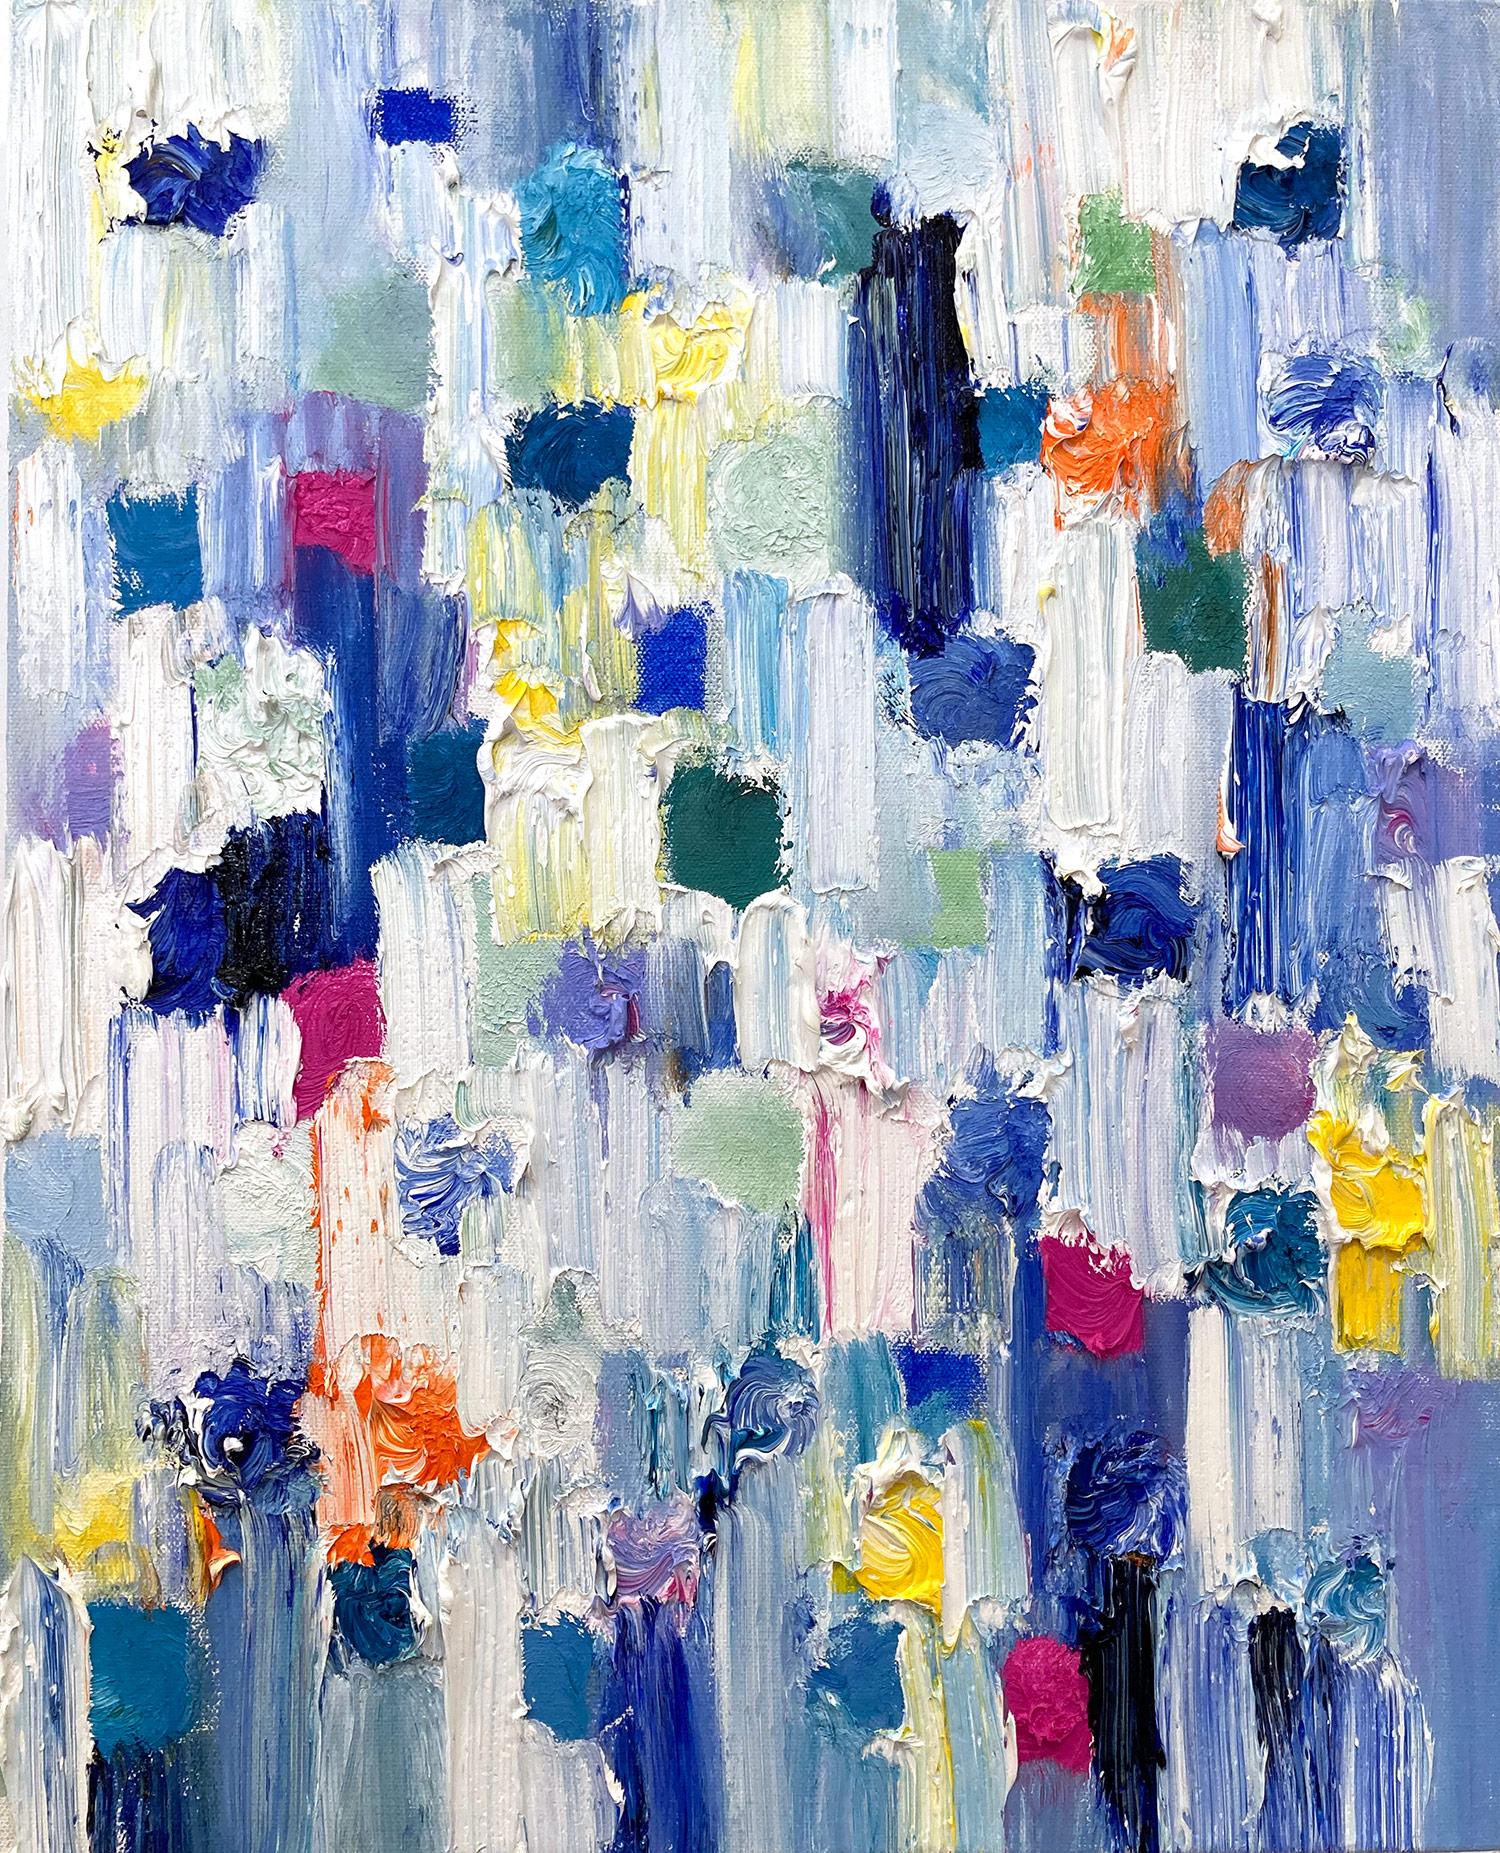 Cindy Shaoul Abstract Painting - "Dripping Dots - Springtime in Rome" Colorful Abstract Oil Painting on Canvas